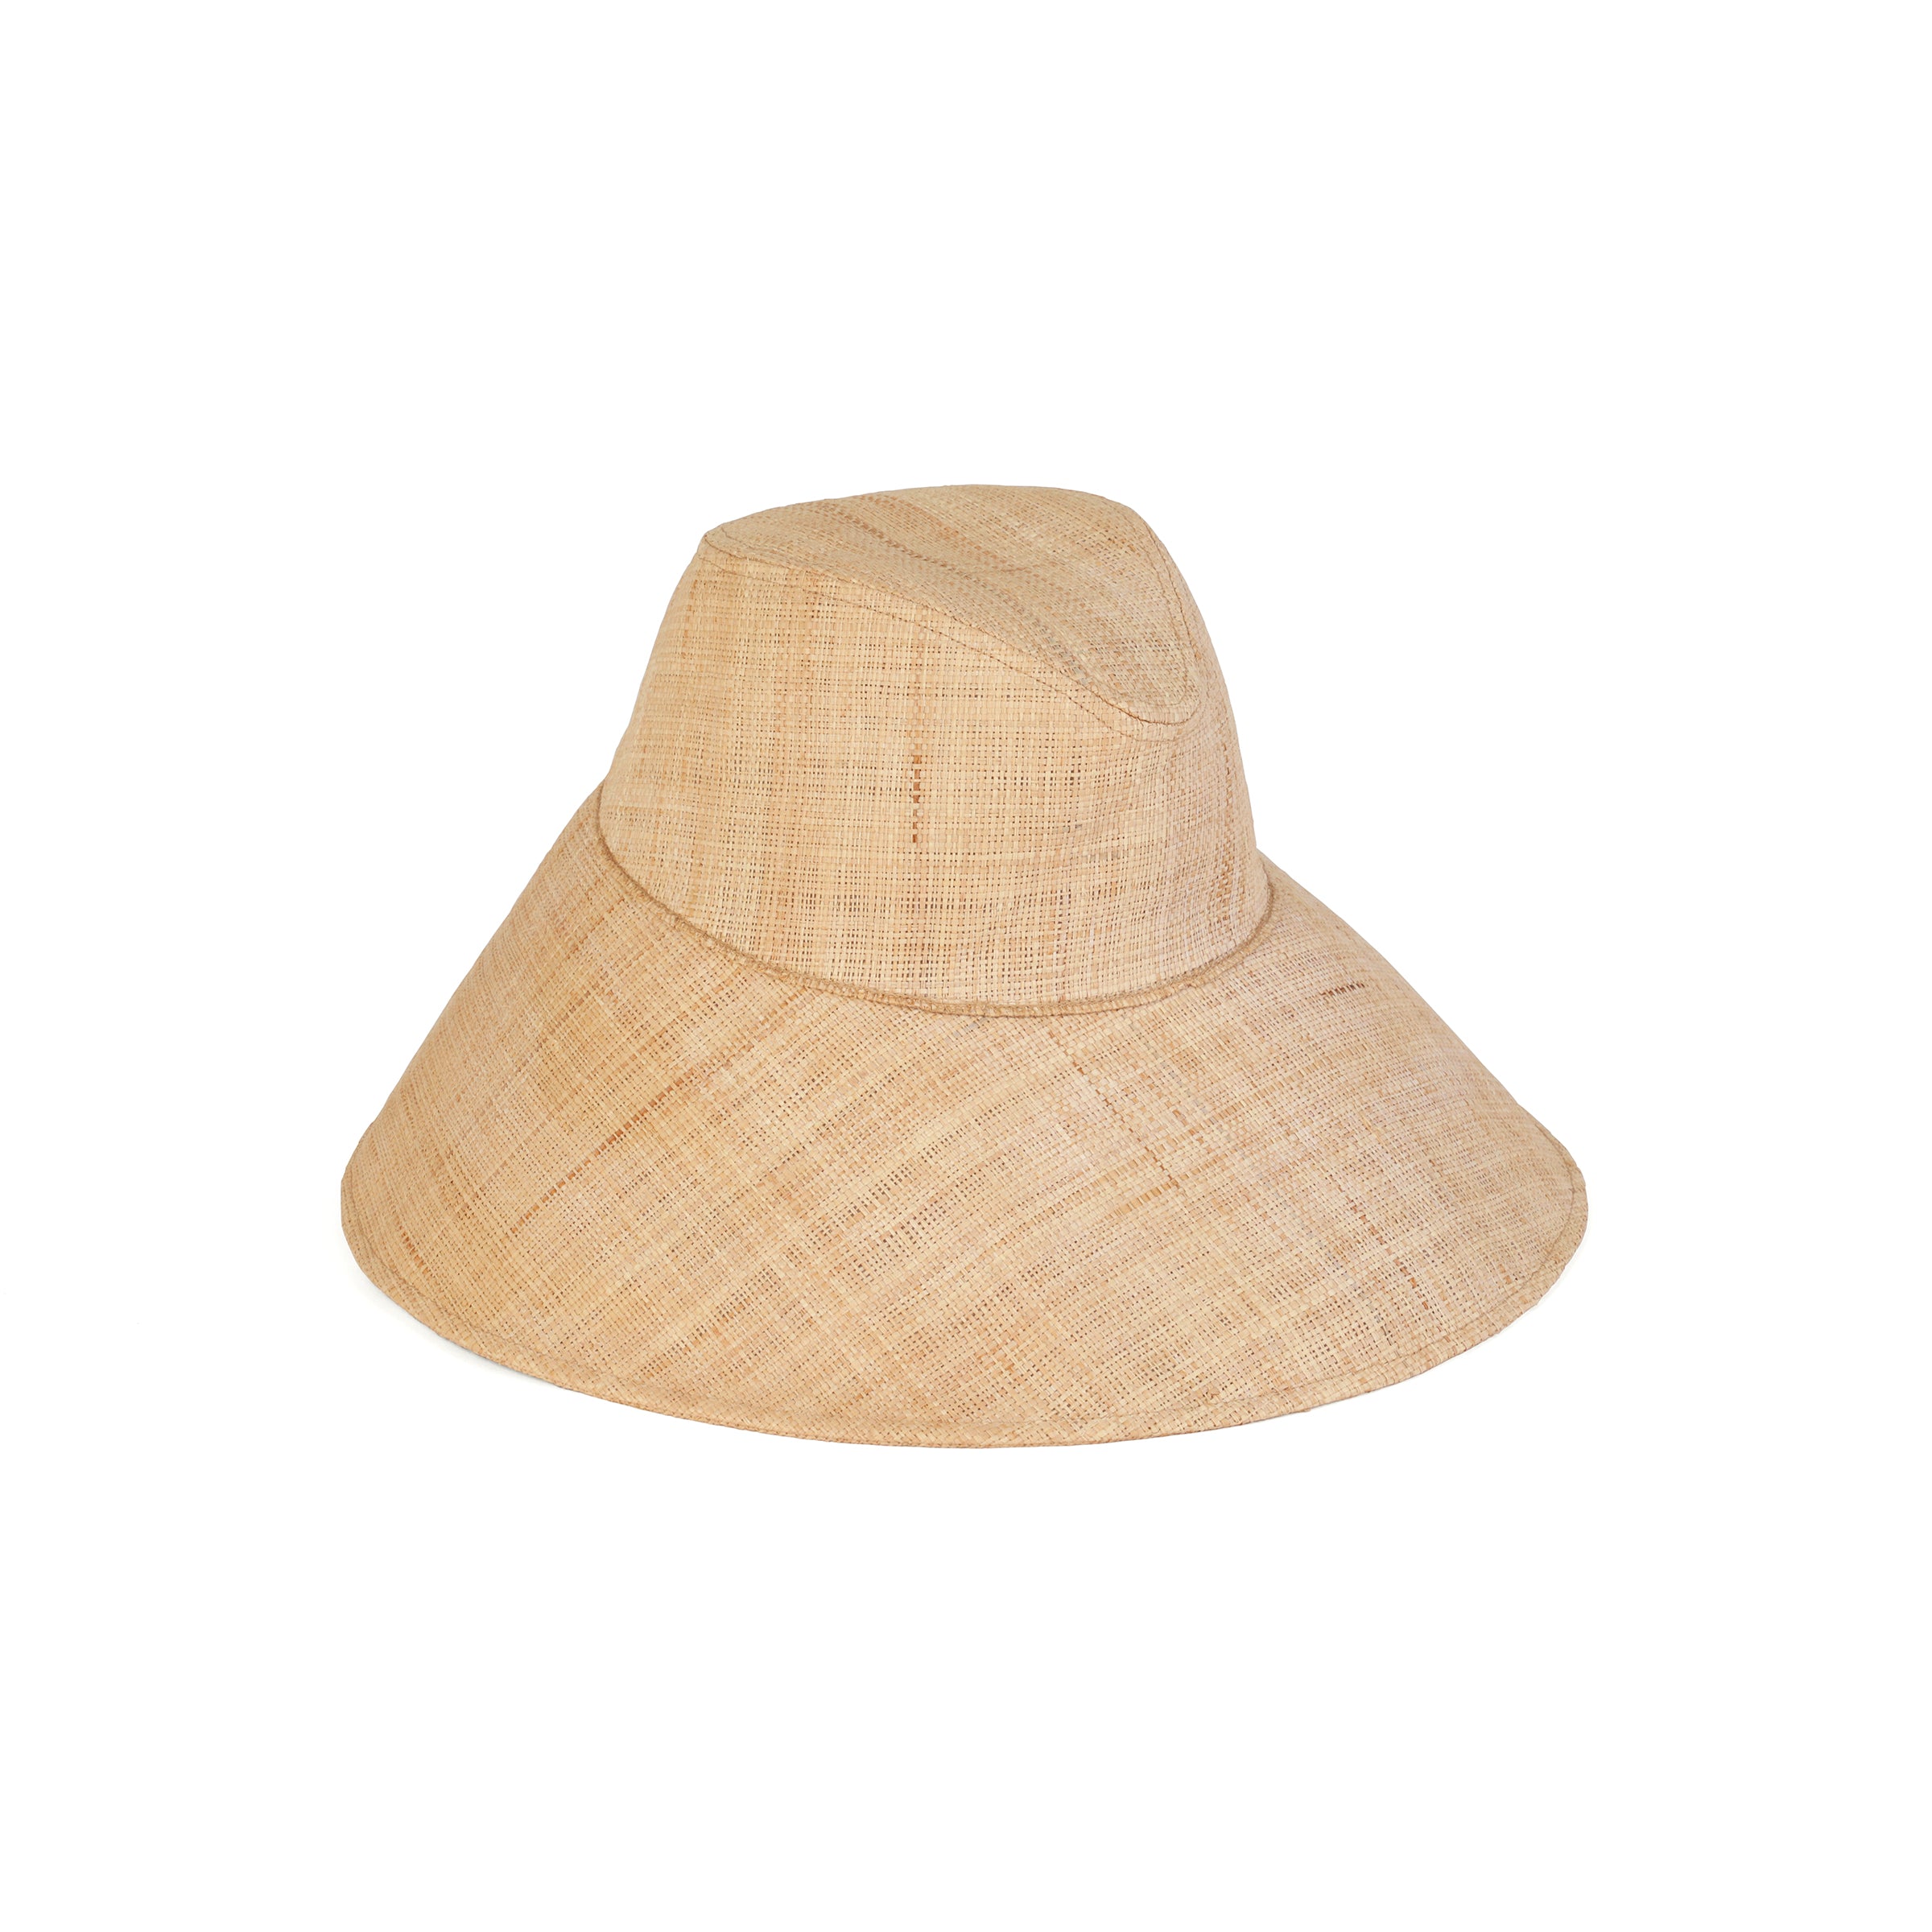 The Cove Straw Bucket Hat in Natural - Lack of Color US